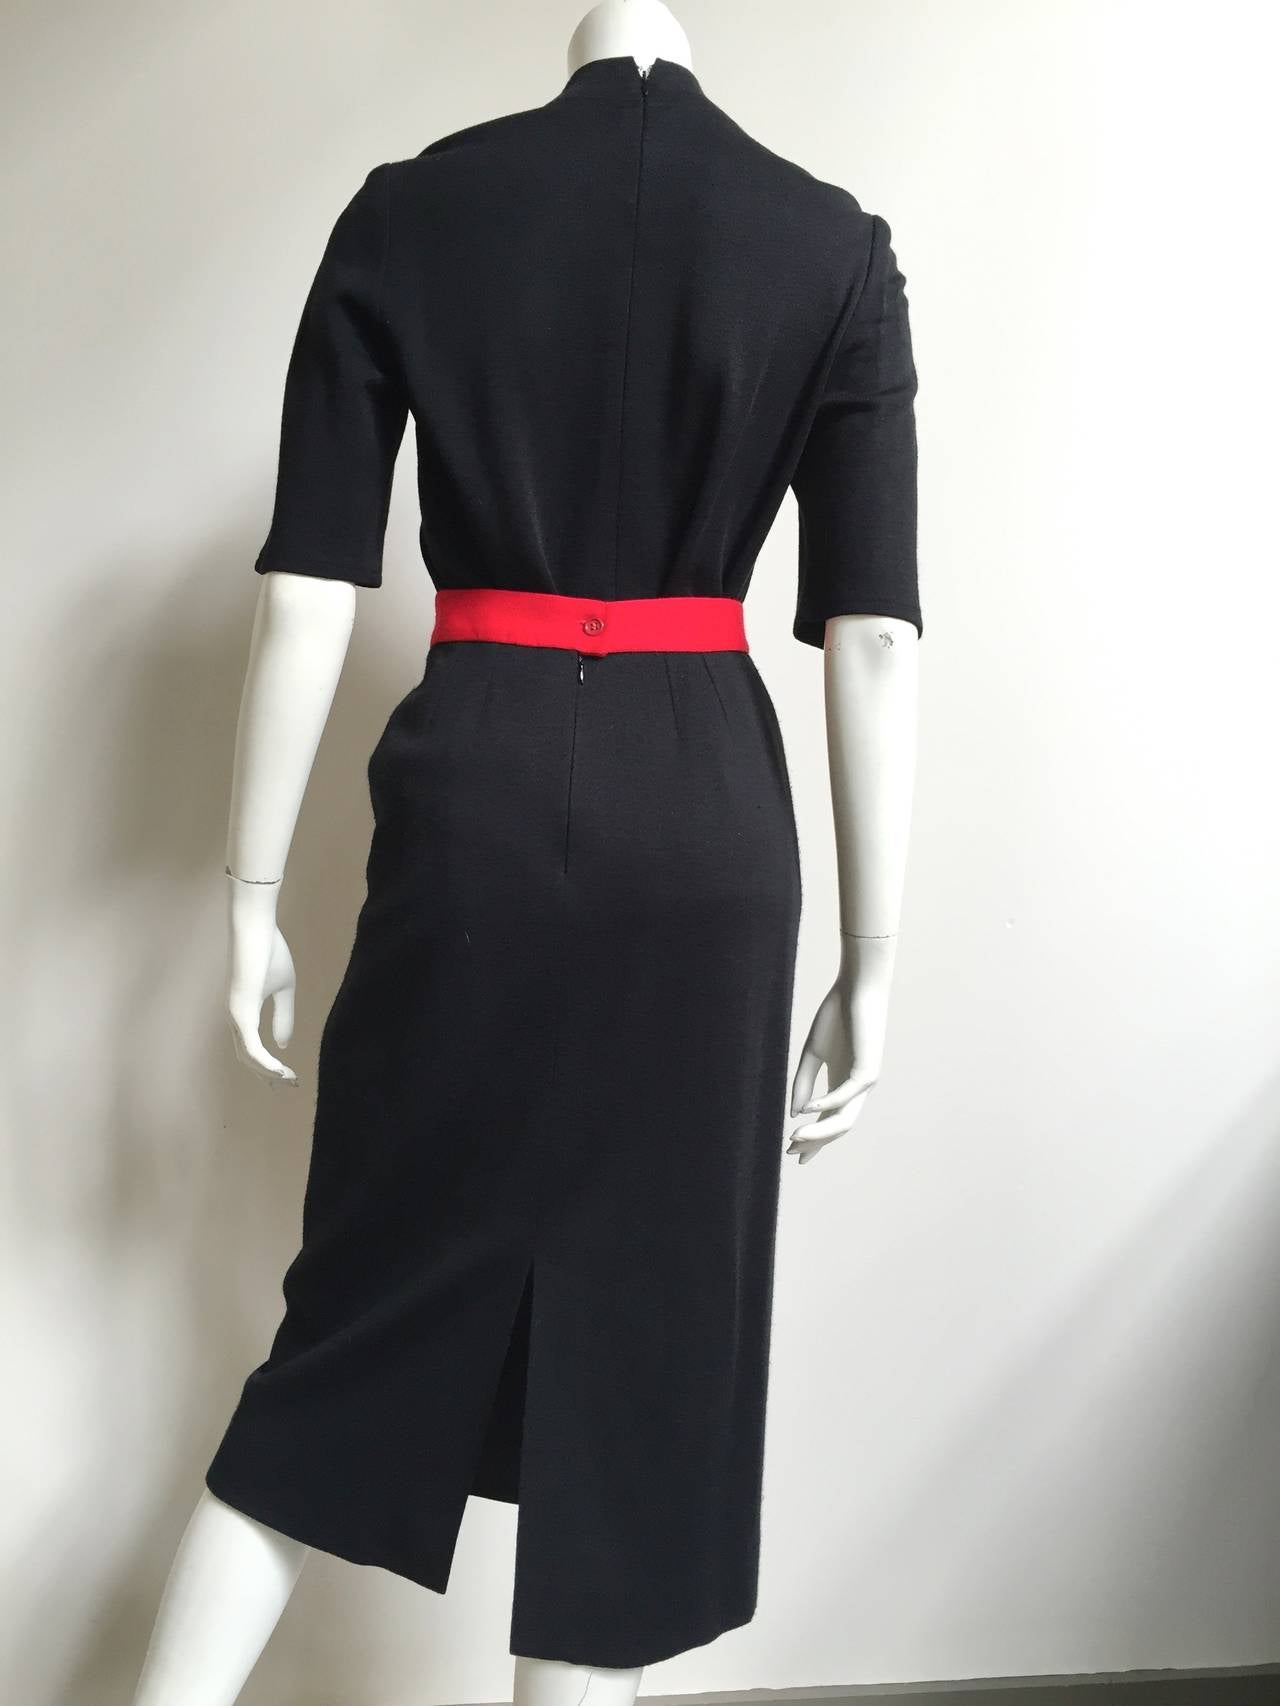 Women's Carven 60s Knit Top & Skirt Size 6.